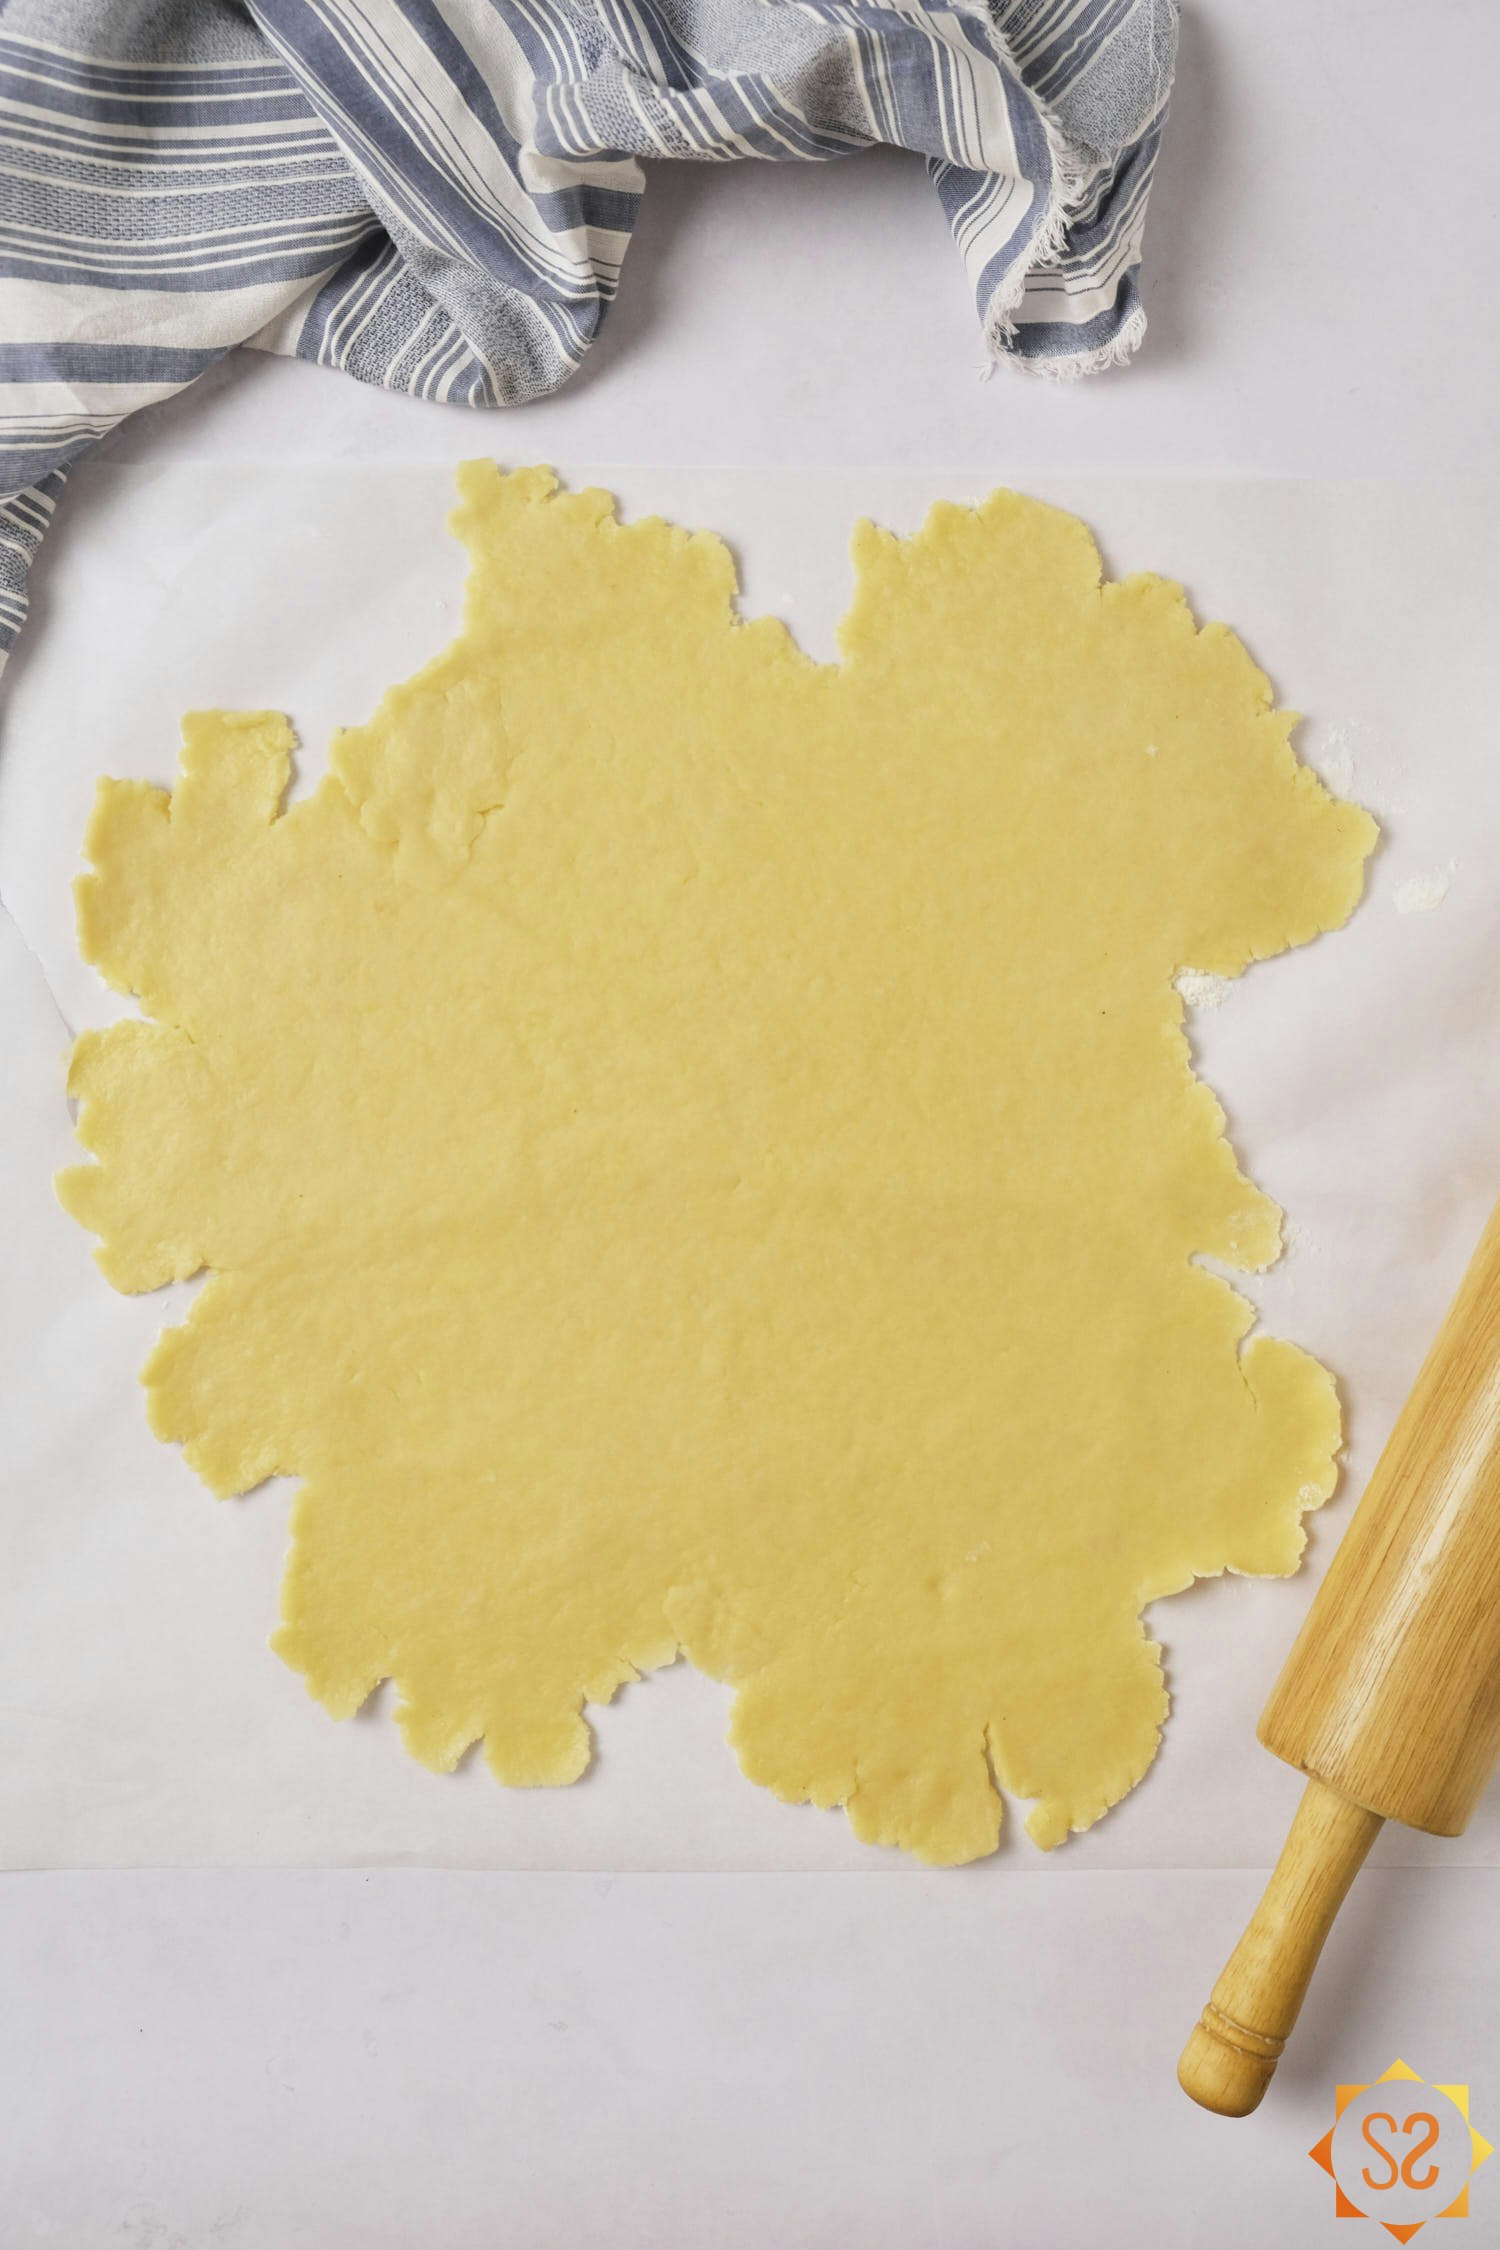 Pate brisee dough rolled out on a piece of parchment paper with a rolling pin to the side.